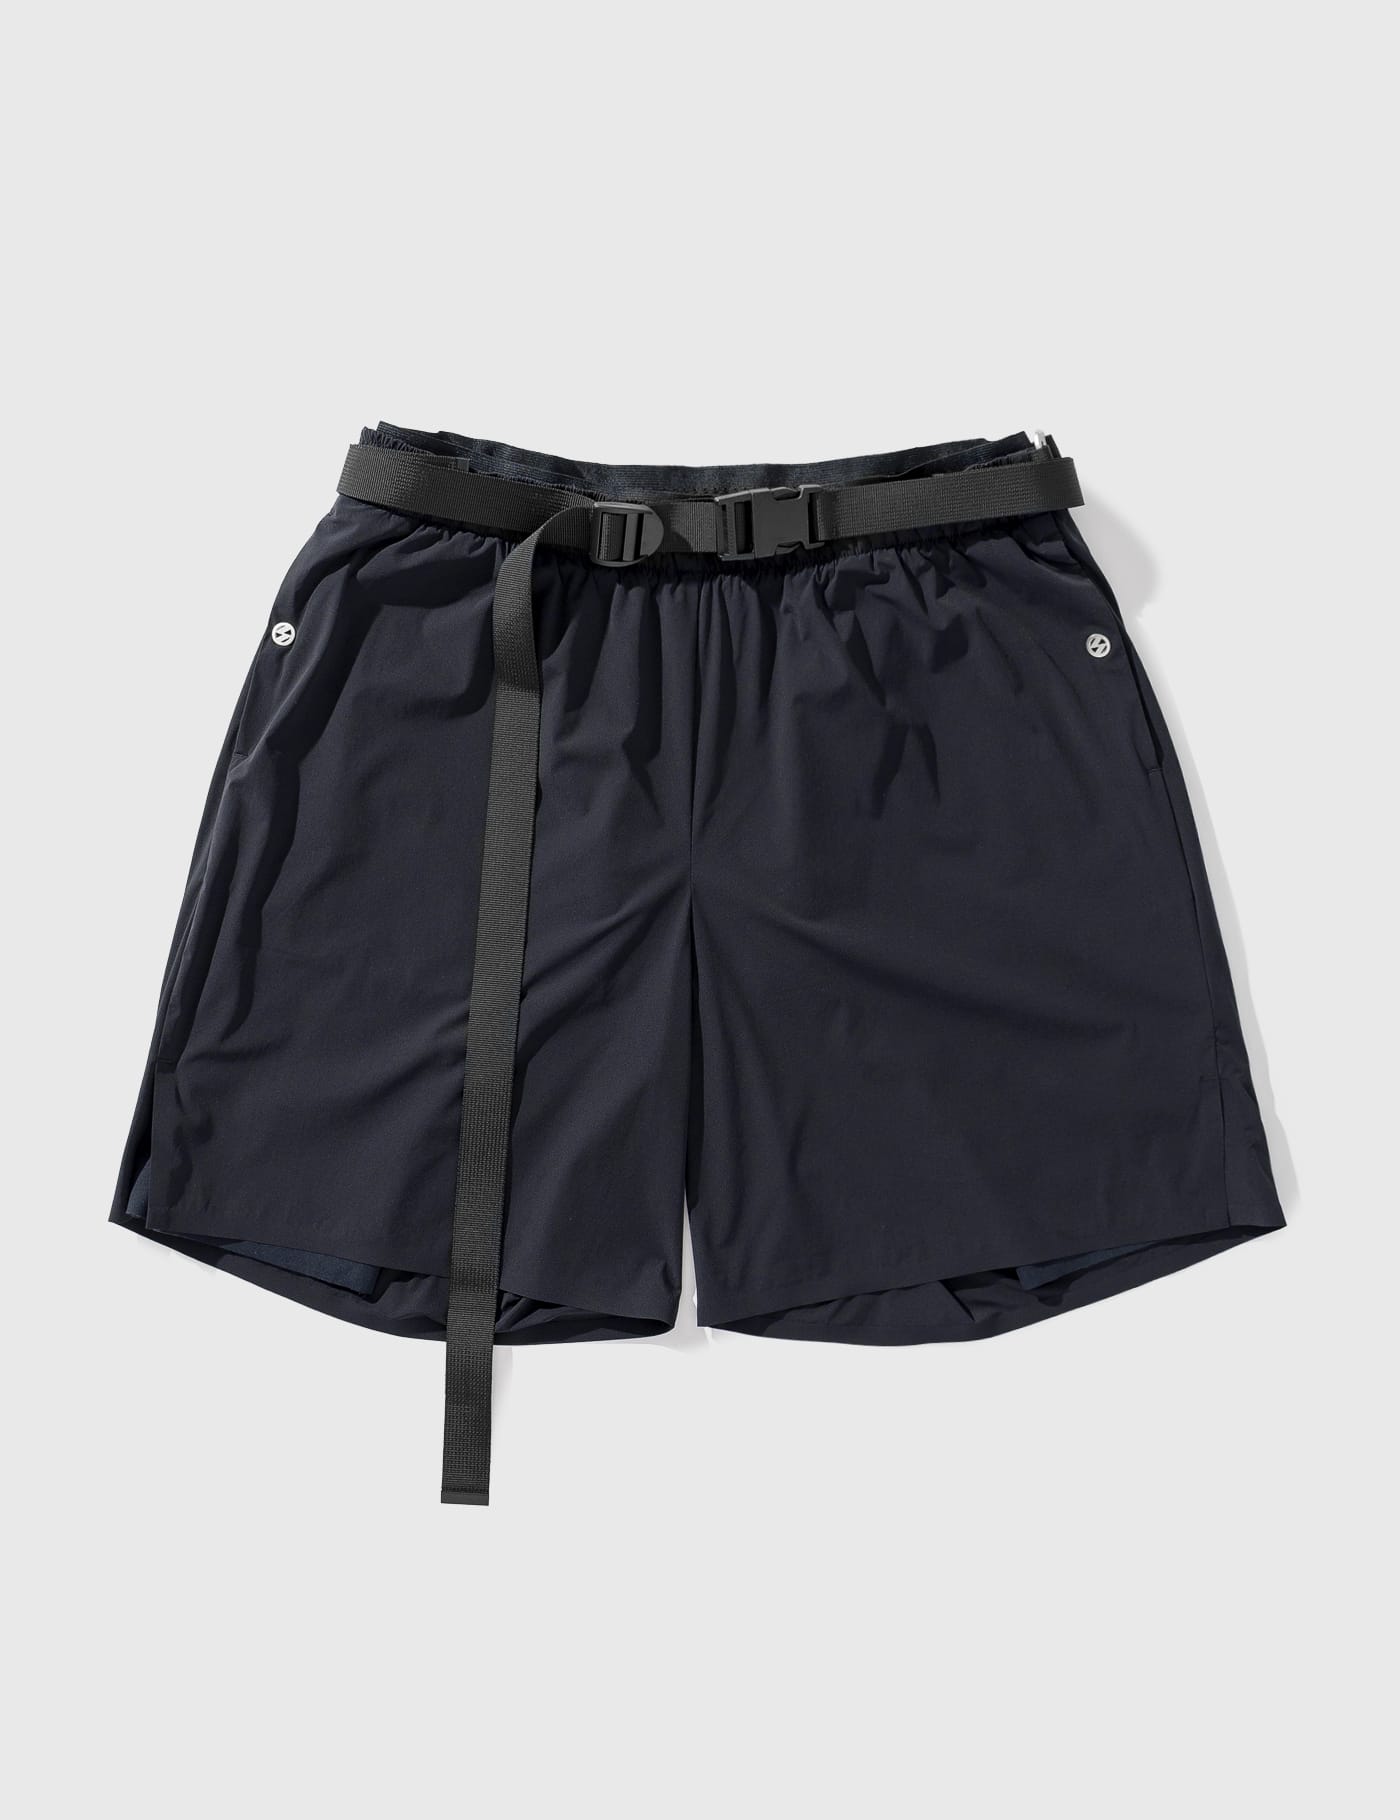 The Salvages Liberty Bondage 24HR Runner Shorts